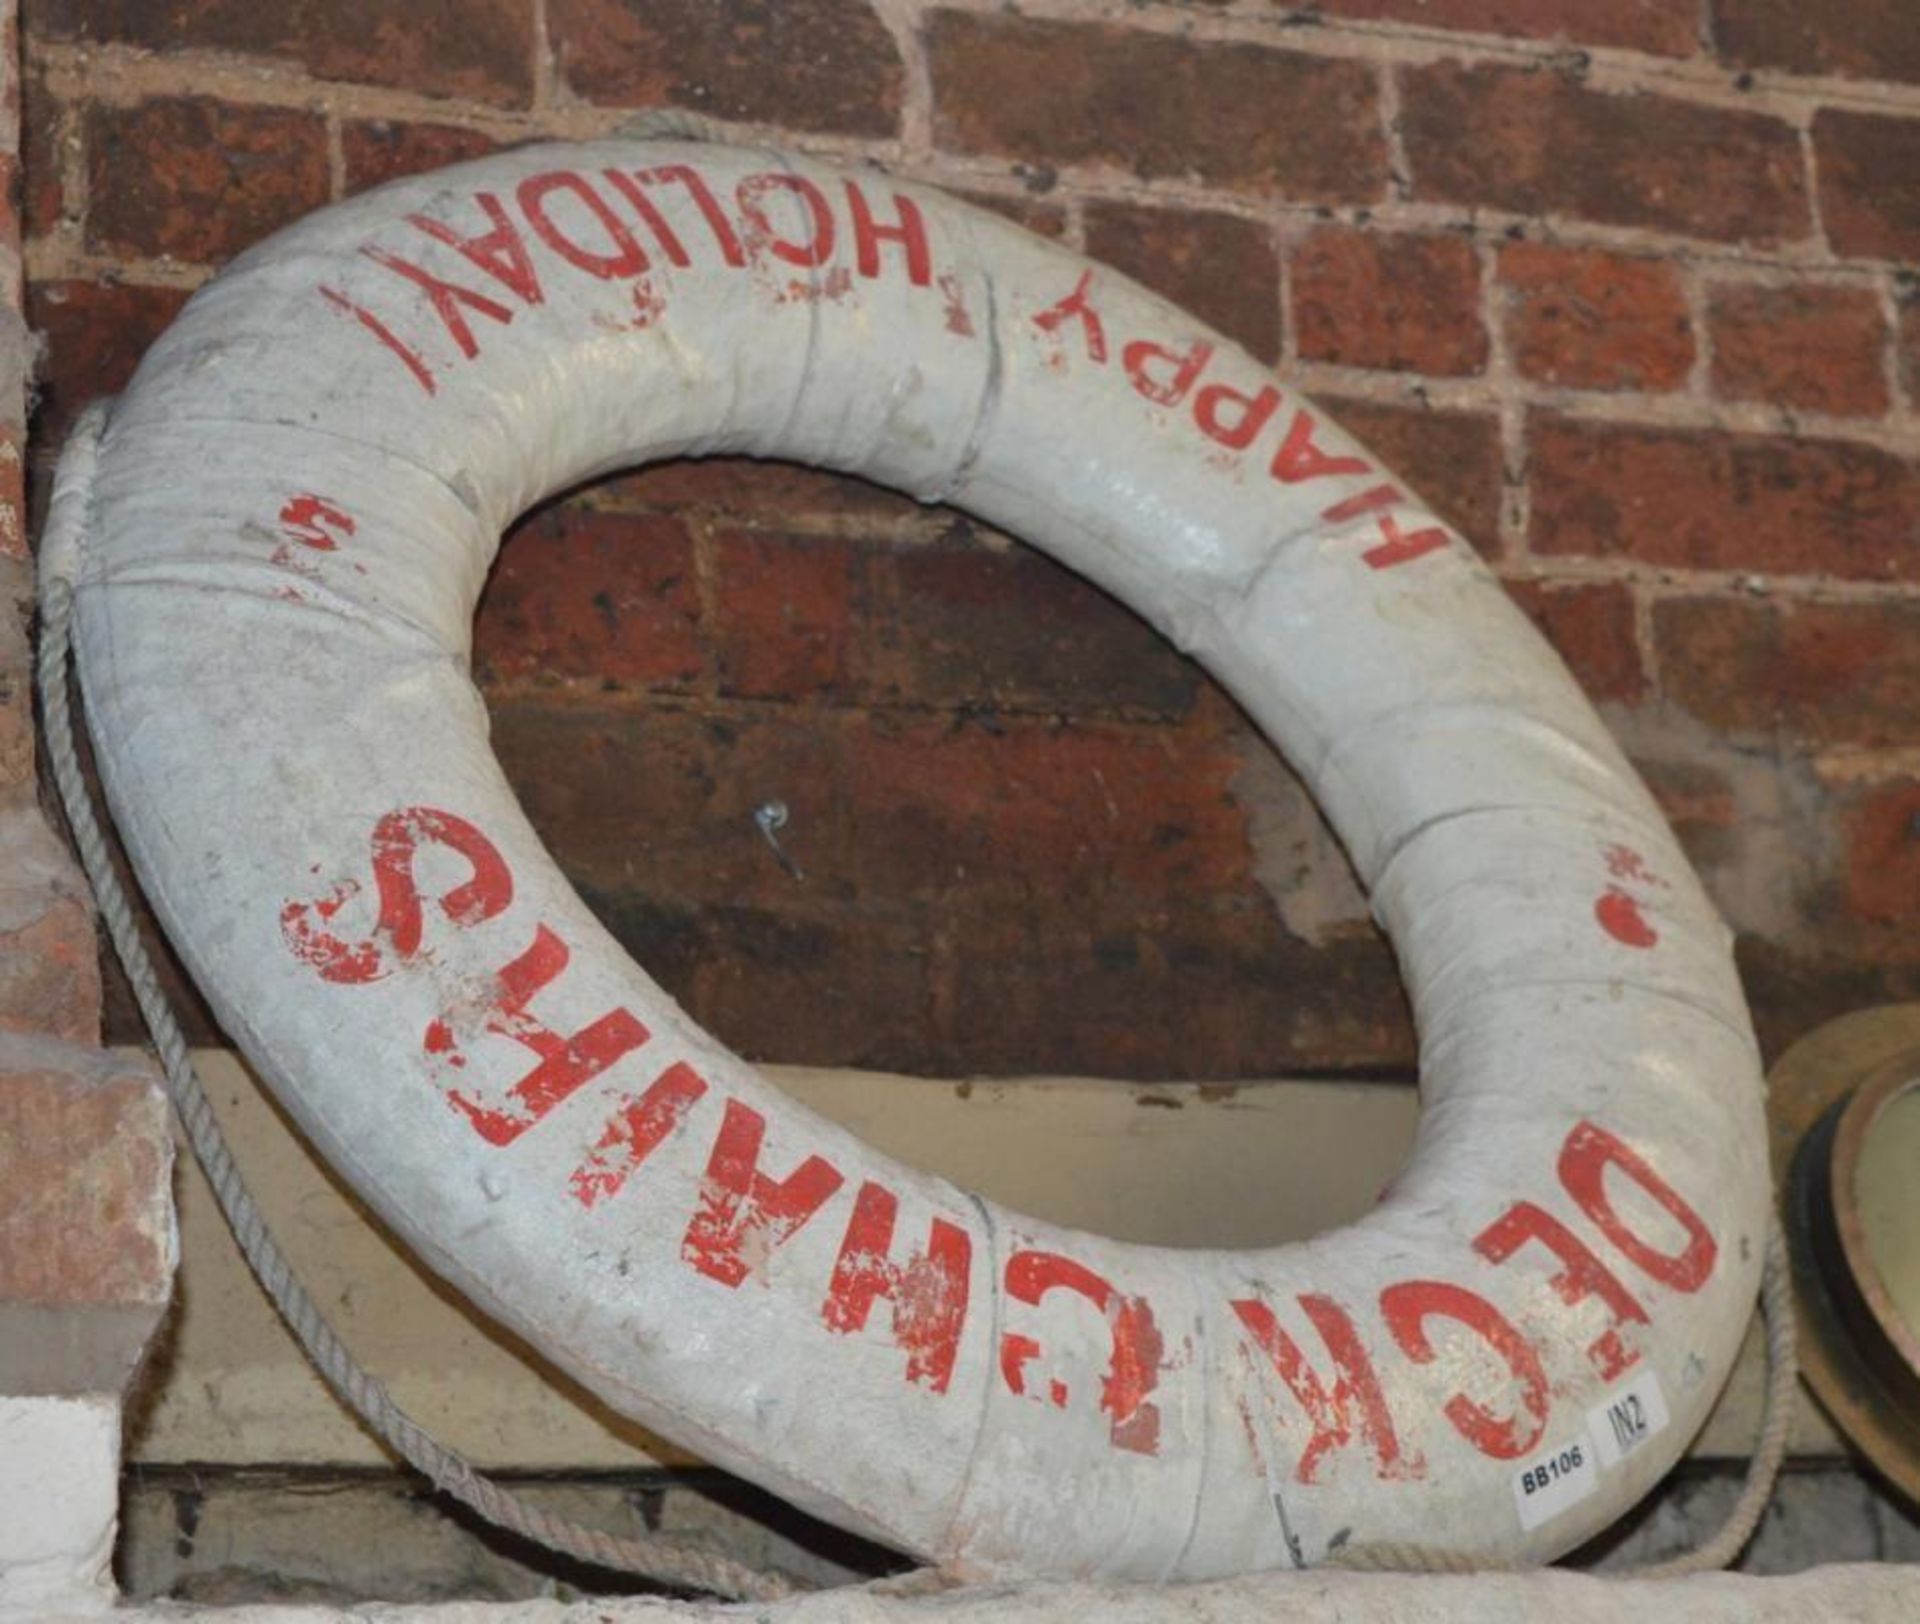 1 x Vintage Happy Holidays Deck Chairs Life Saving Buoy Ring - Ref BB106 SF - CL351 - Location: Chor - Image 5 of 5